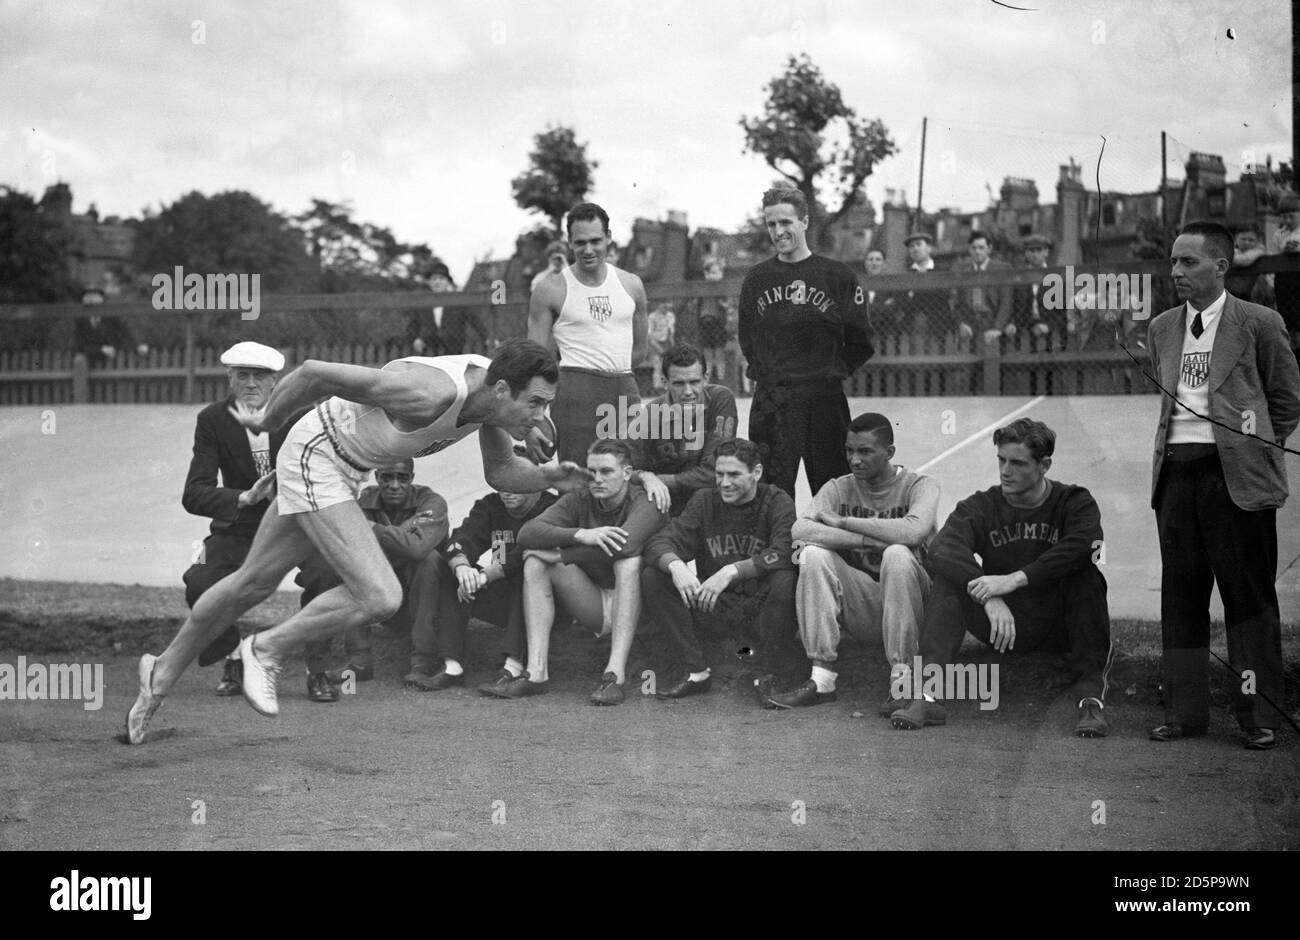 Perrin Walker, of Oglethorpe, Georgia, the 100 yards sprinter in action, is watched by his American team-mates at the White City Stadium, London. Stock Photo